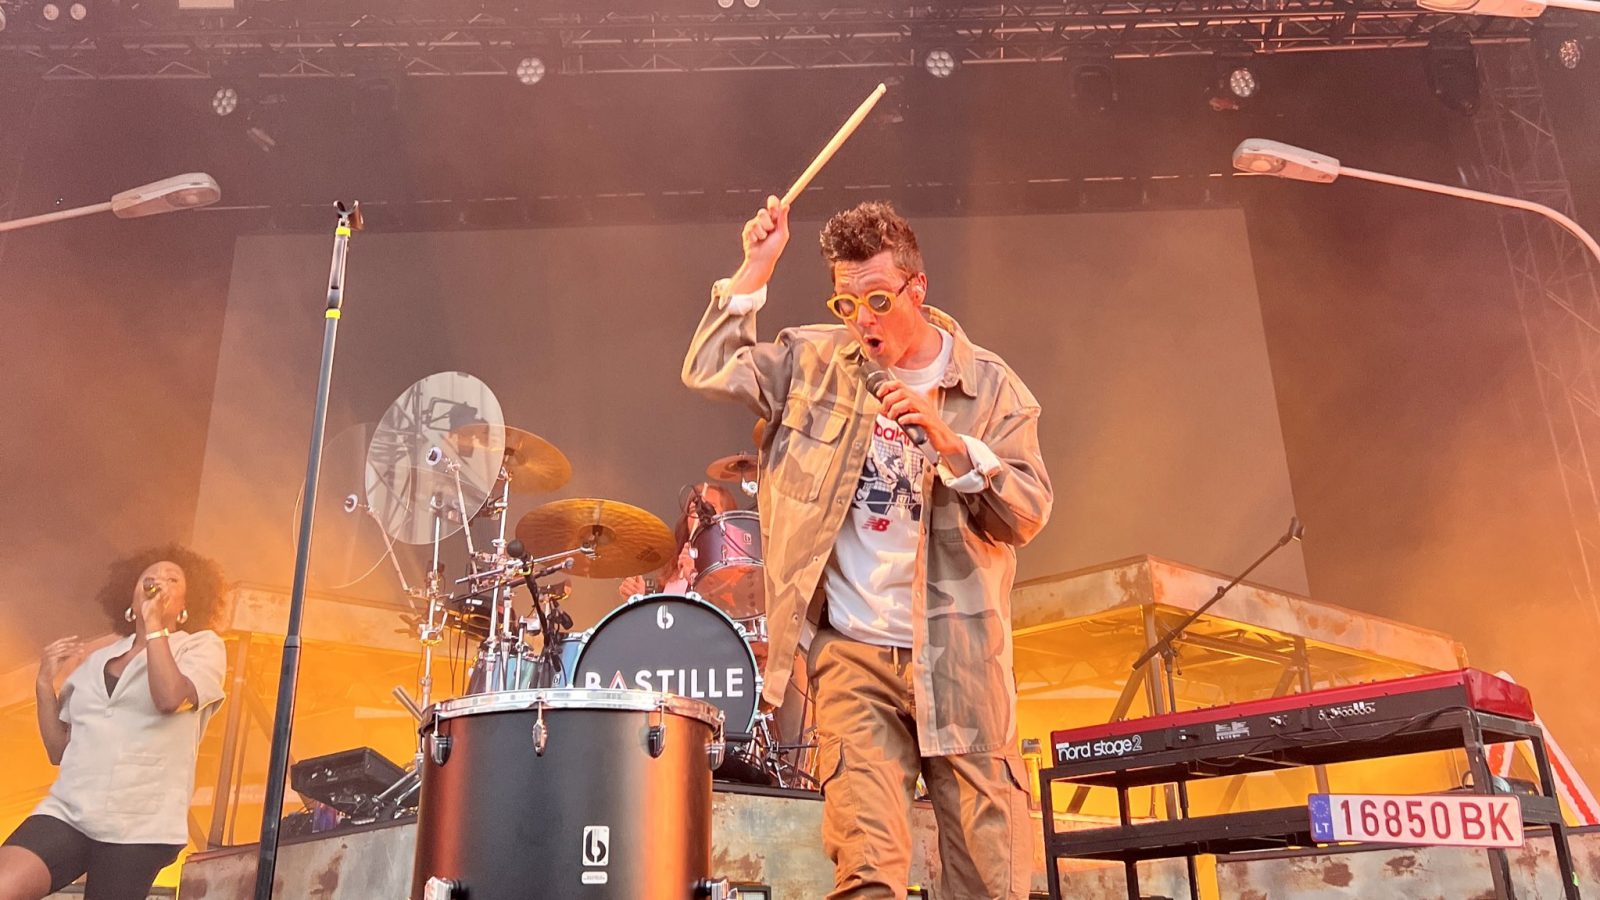 A man singing into a microphone as well as banging a drum.